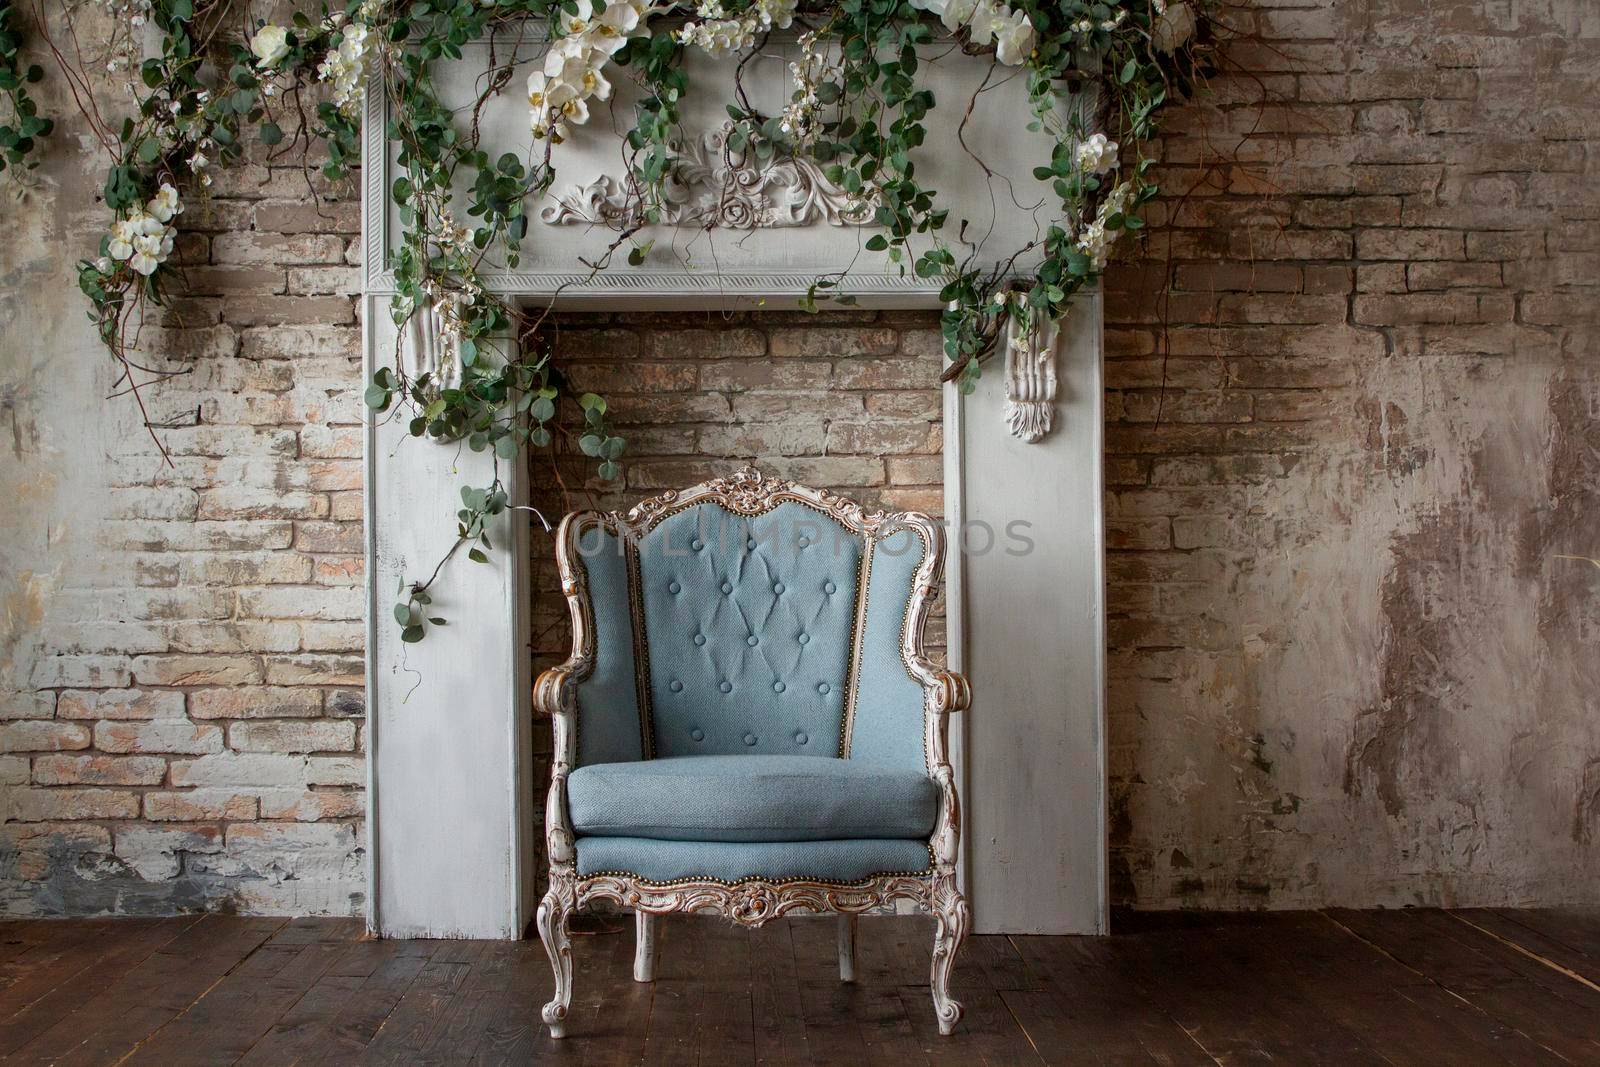 Old antique armchair furniture against a light gray grunge wall, stucco, and vines with flowers Abstract empty room.